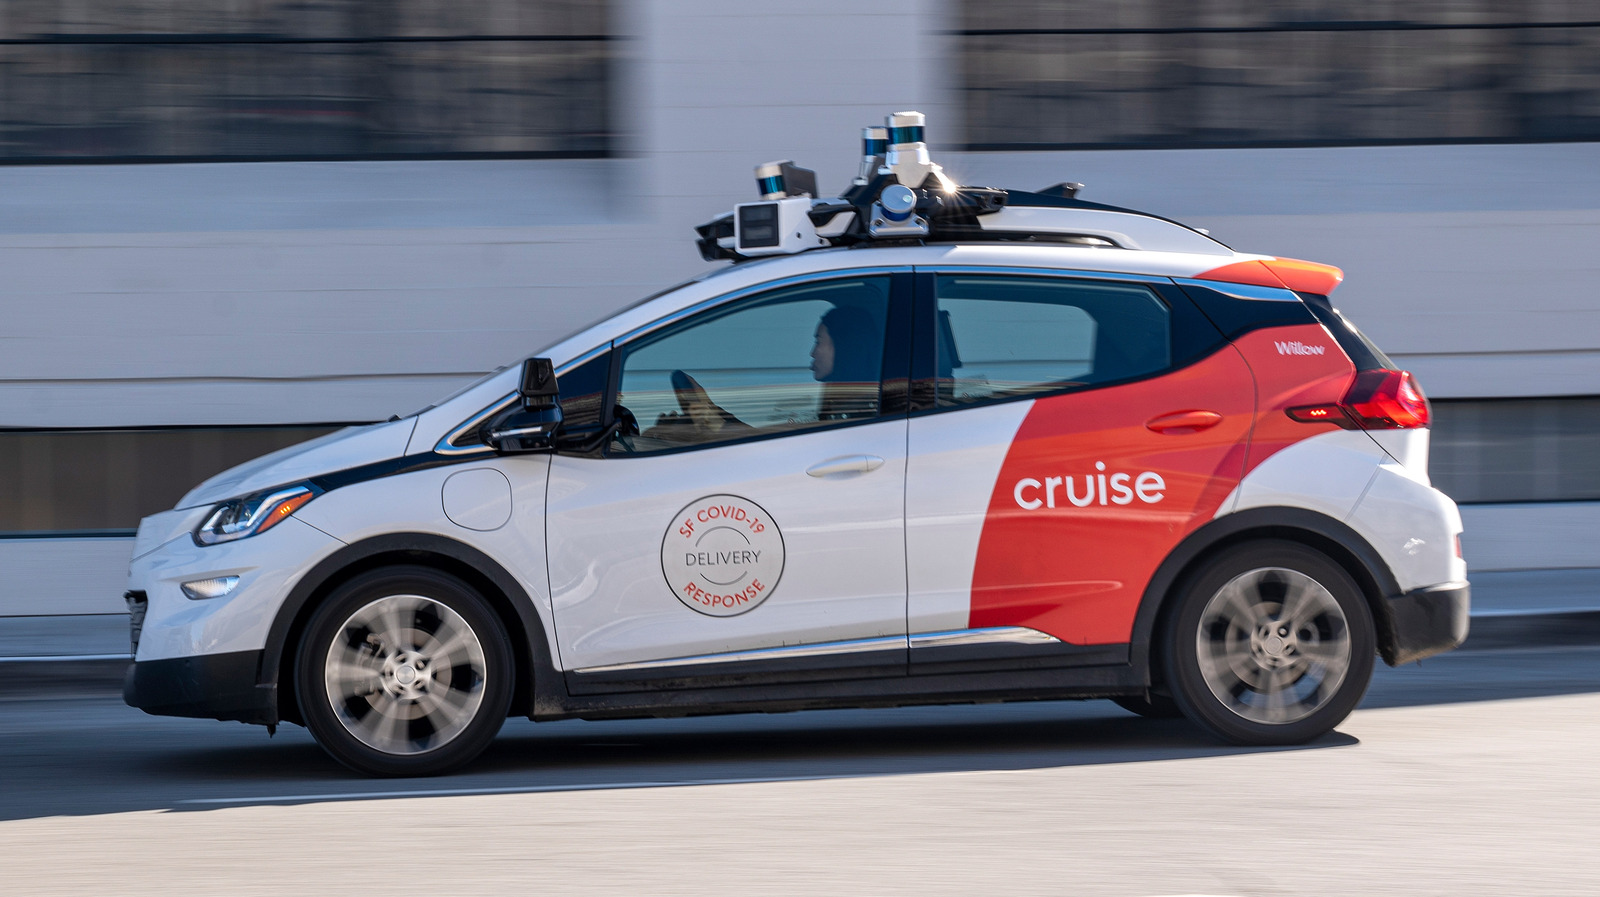 This Alarming Anonymous Letter Put Cruise Robotaxis Under Investigation